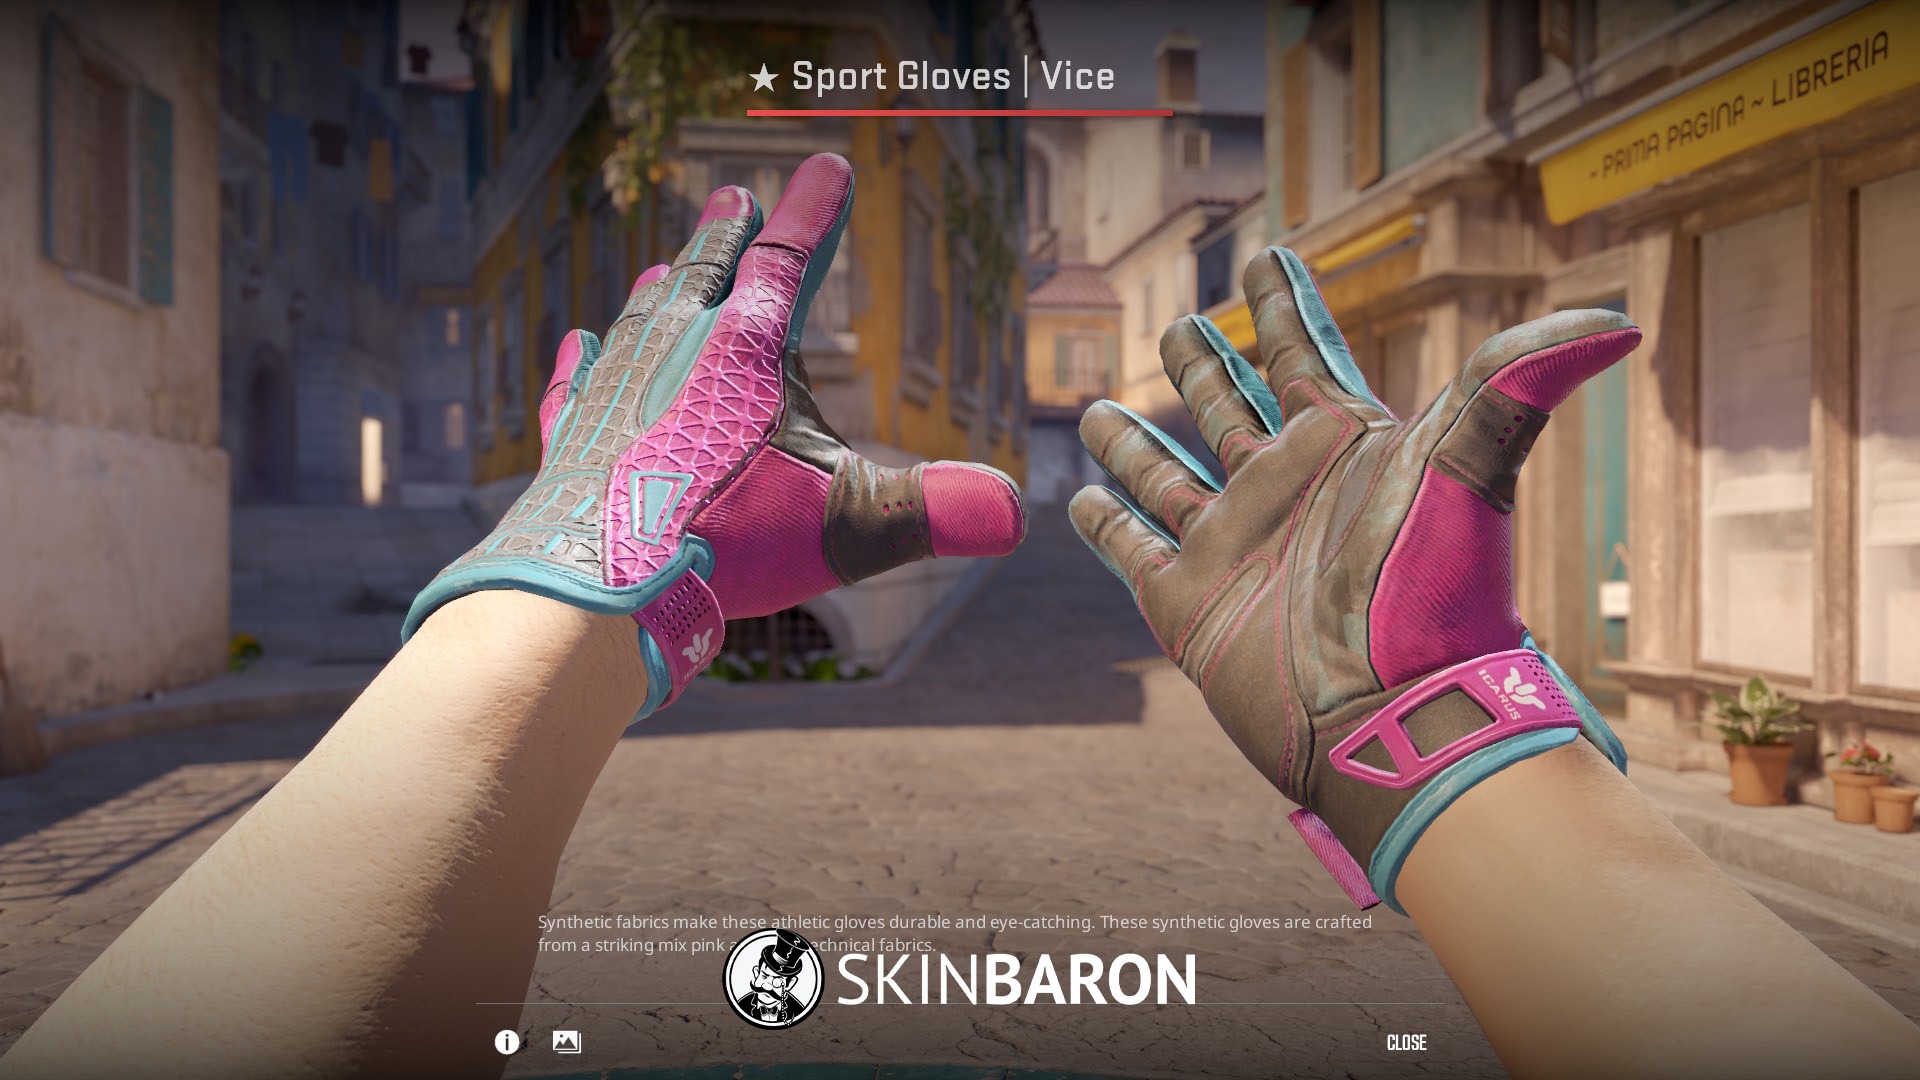 Sport Gloves Vice Factory New, most expensive Counter-Strike skins